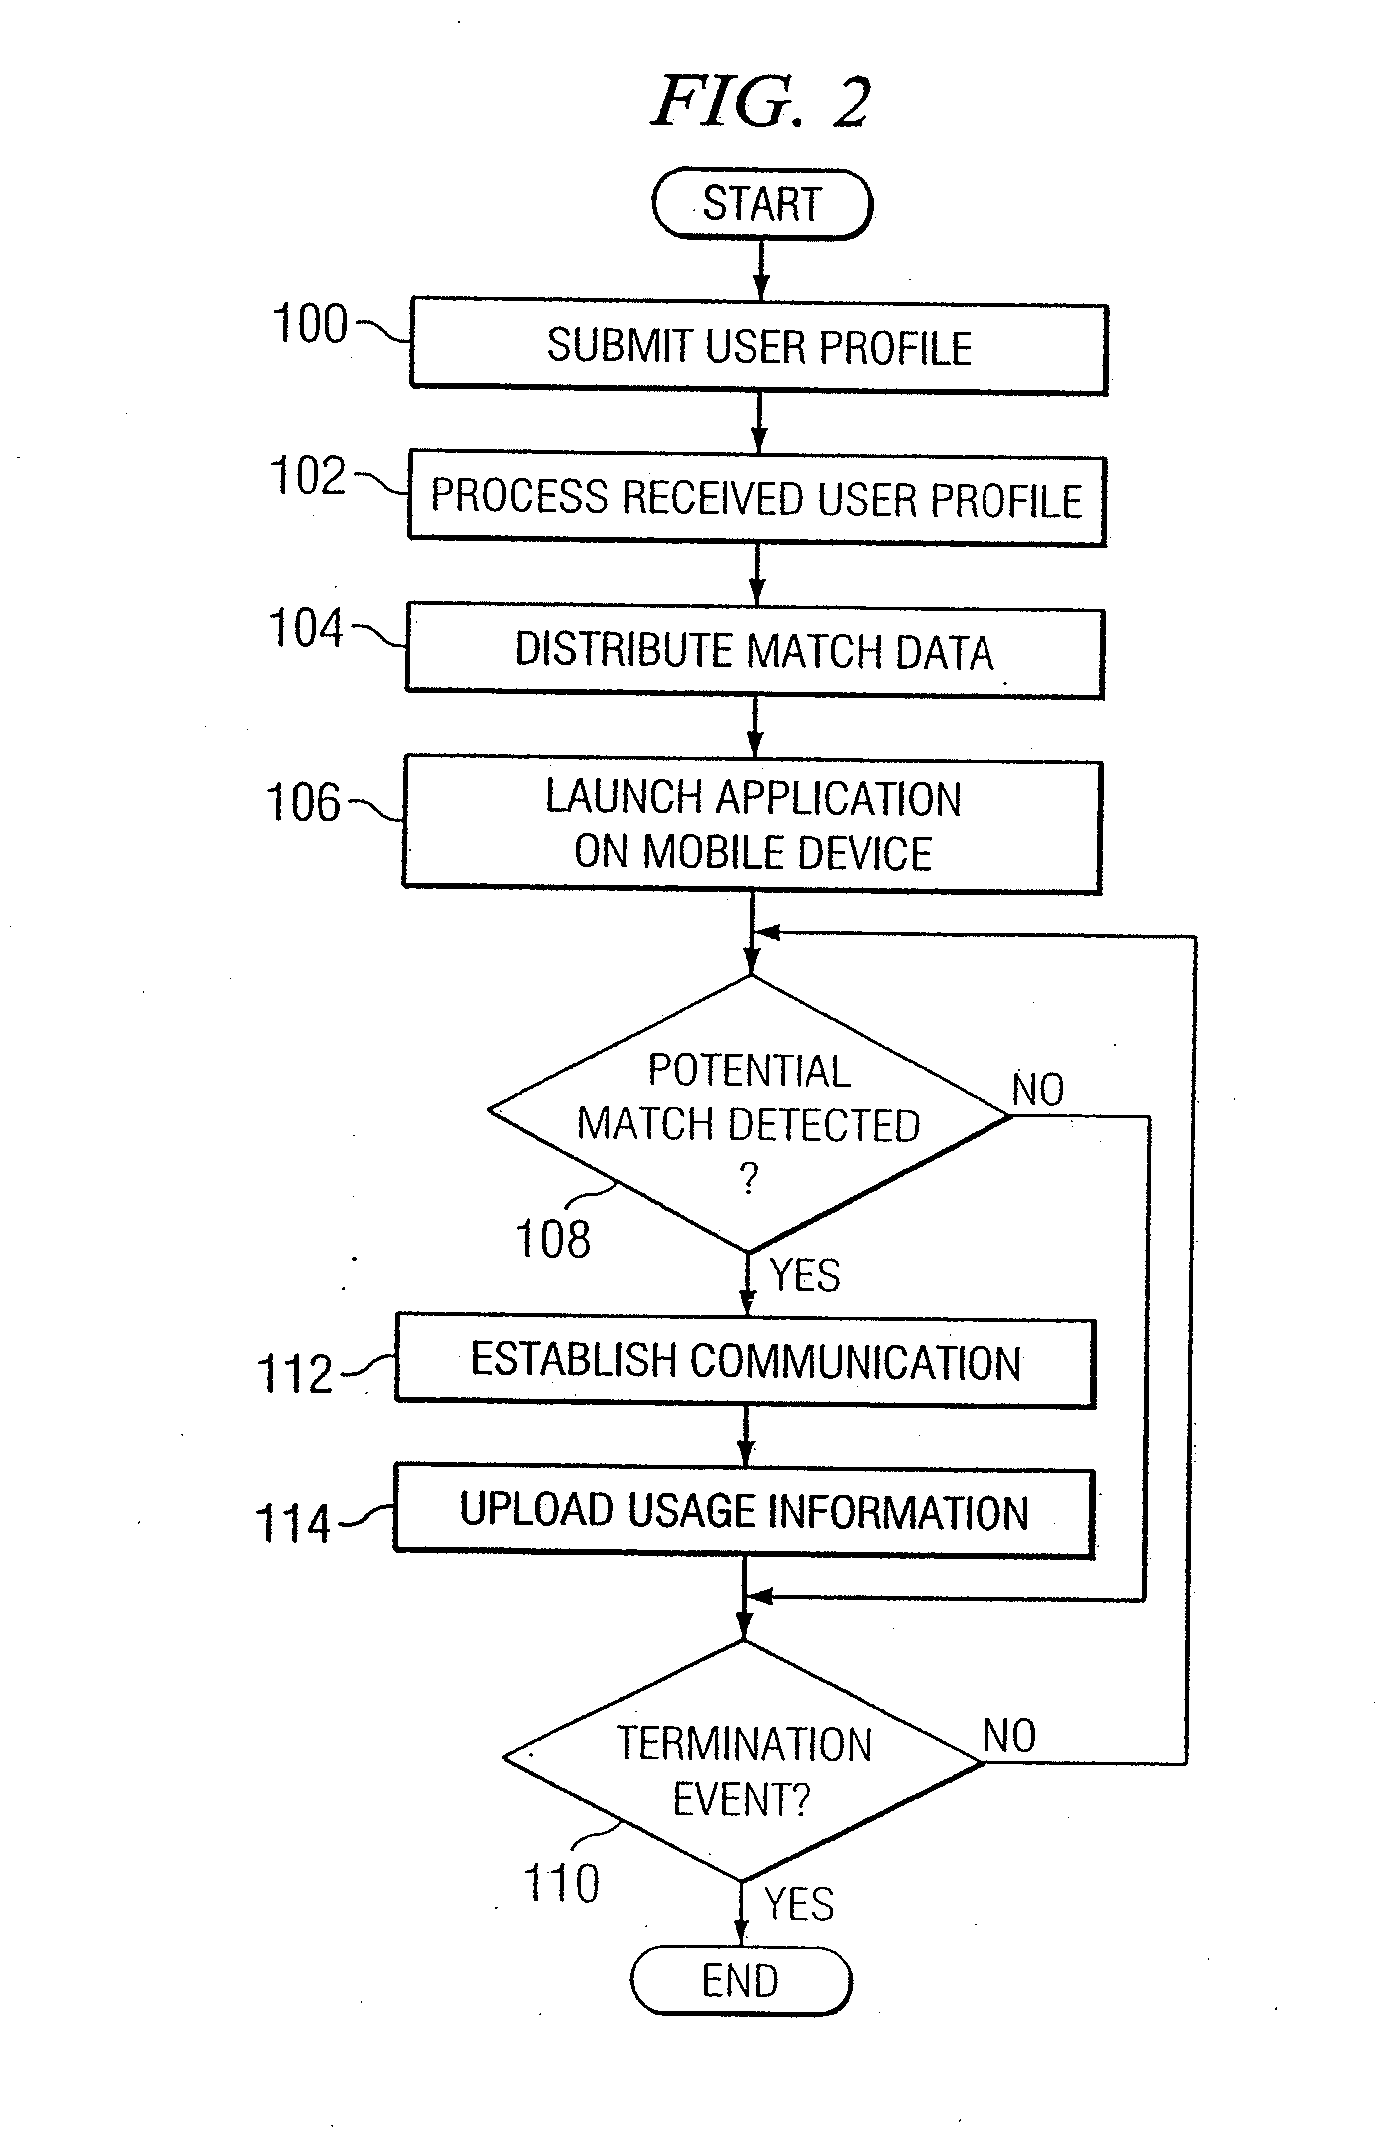 System and Method for Providing Communication Services to Mobile Device Users Incorporating Proximity Determination